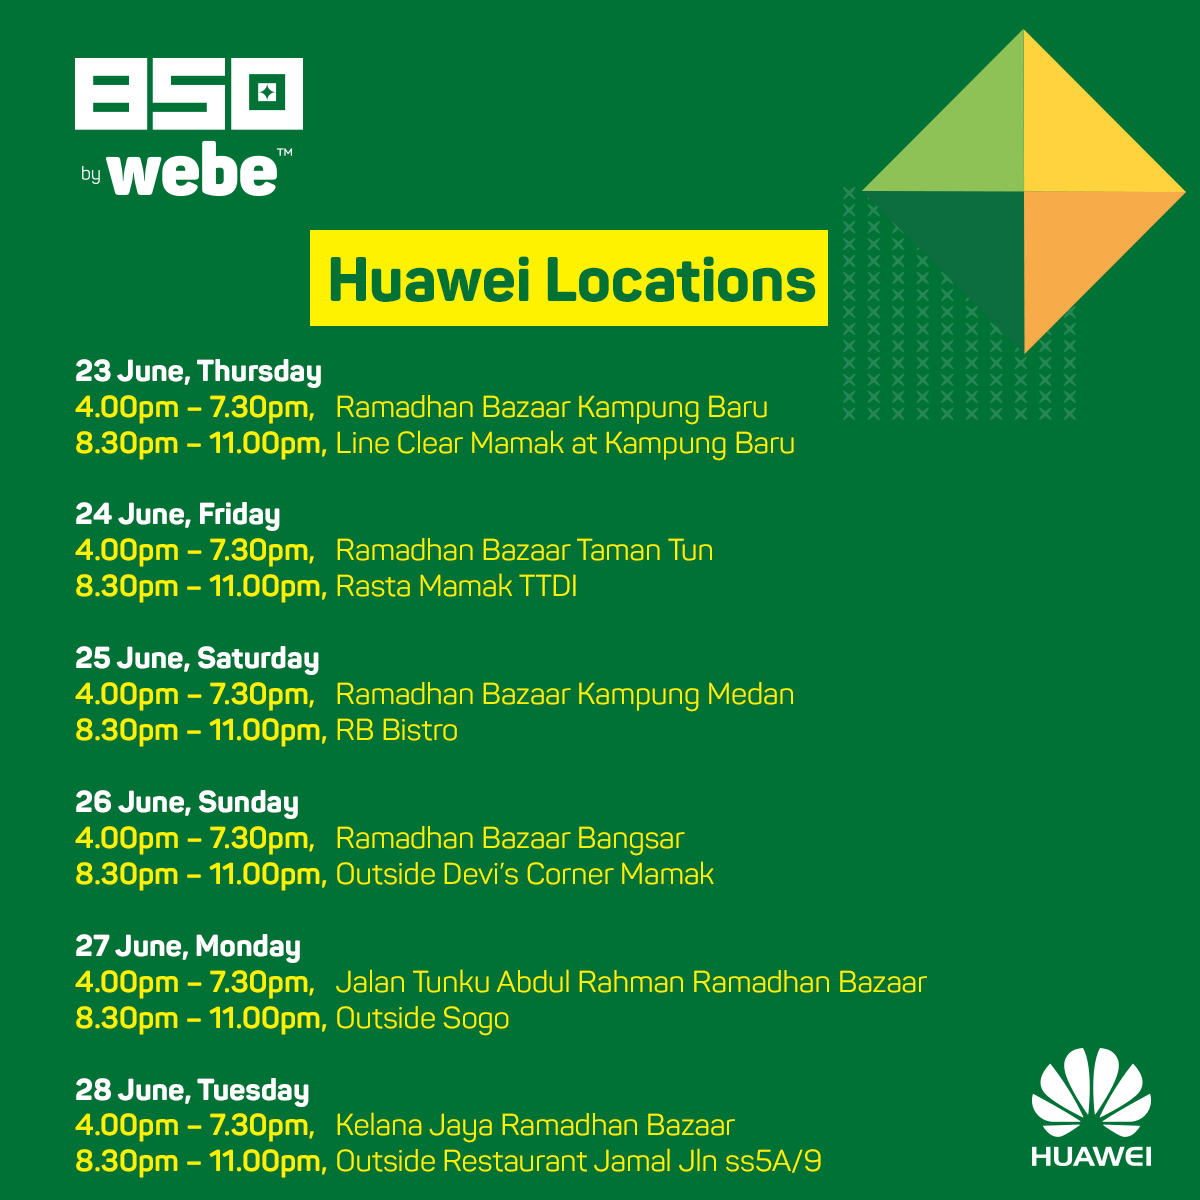 850-Event-Table-Huawei